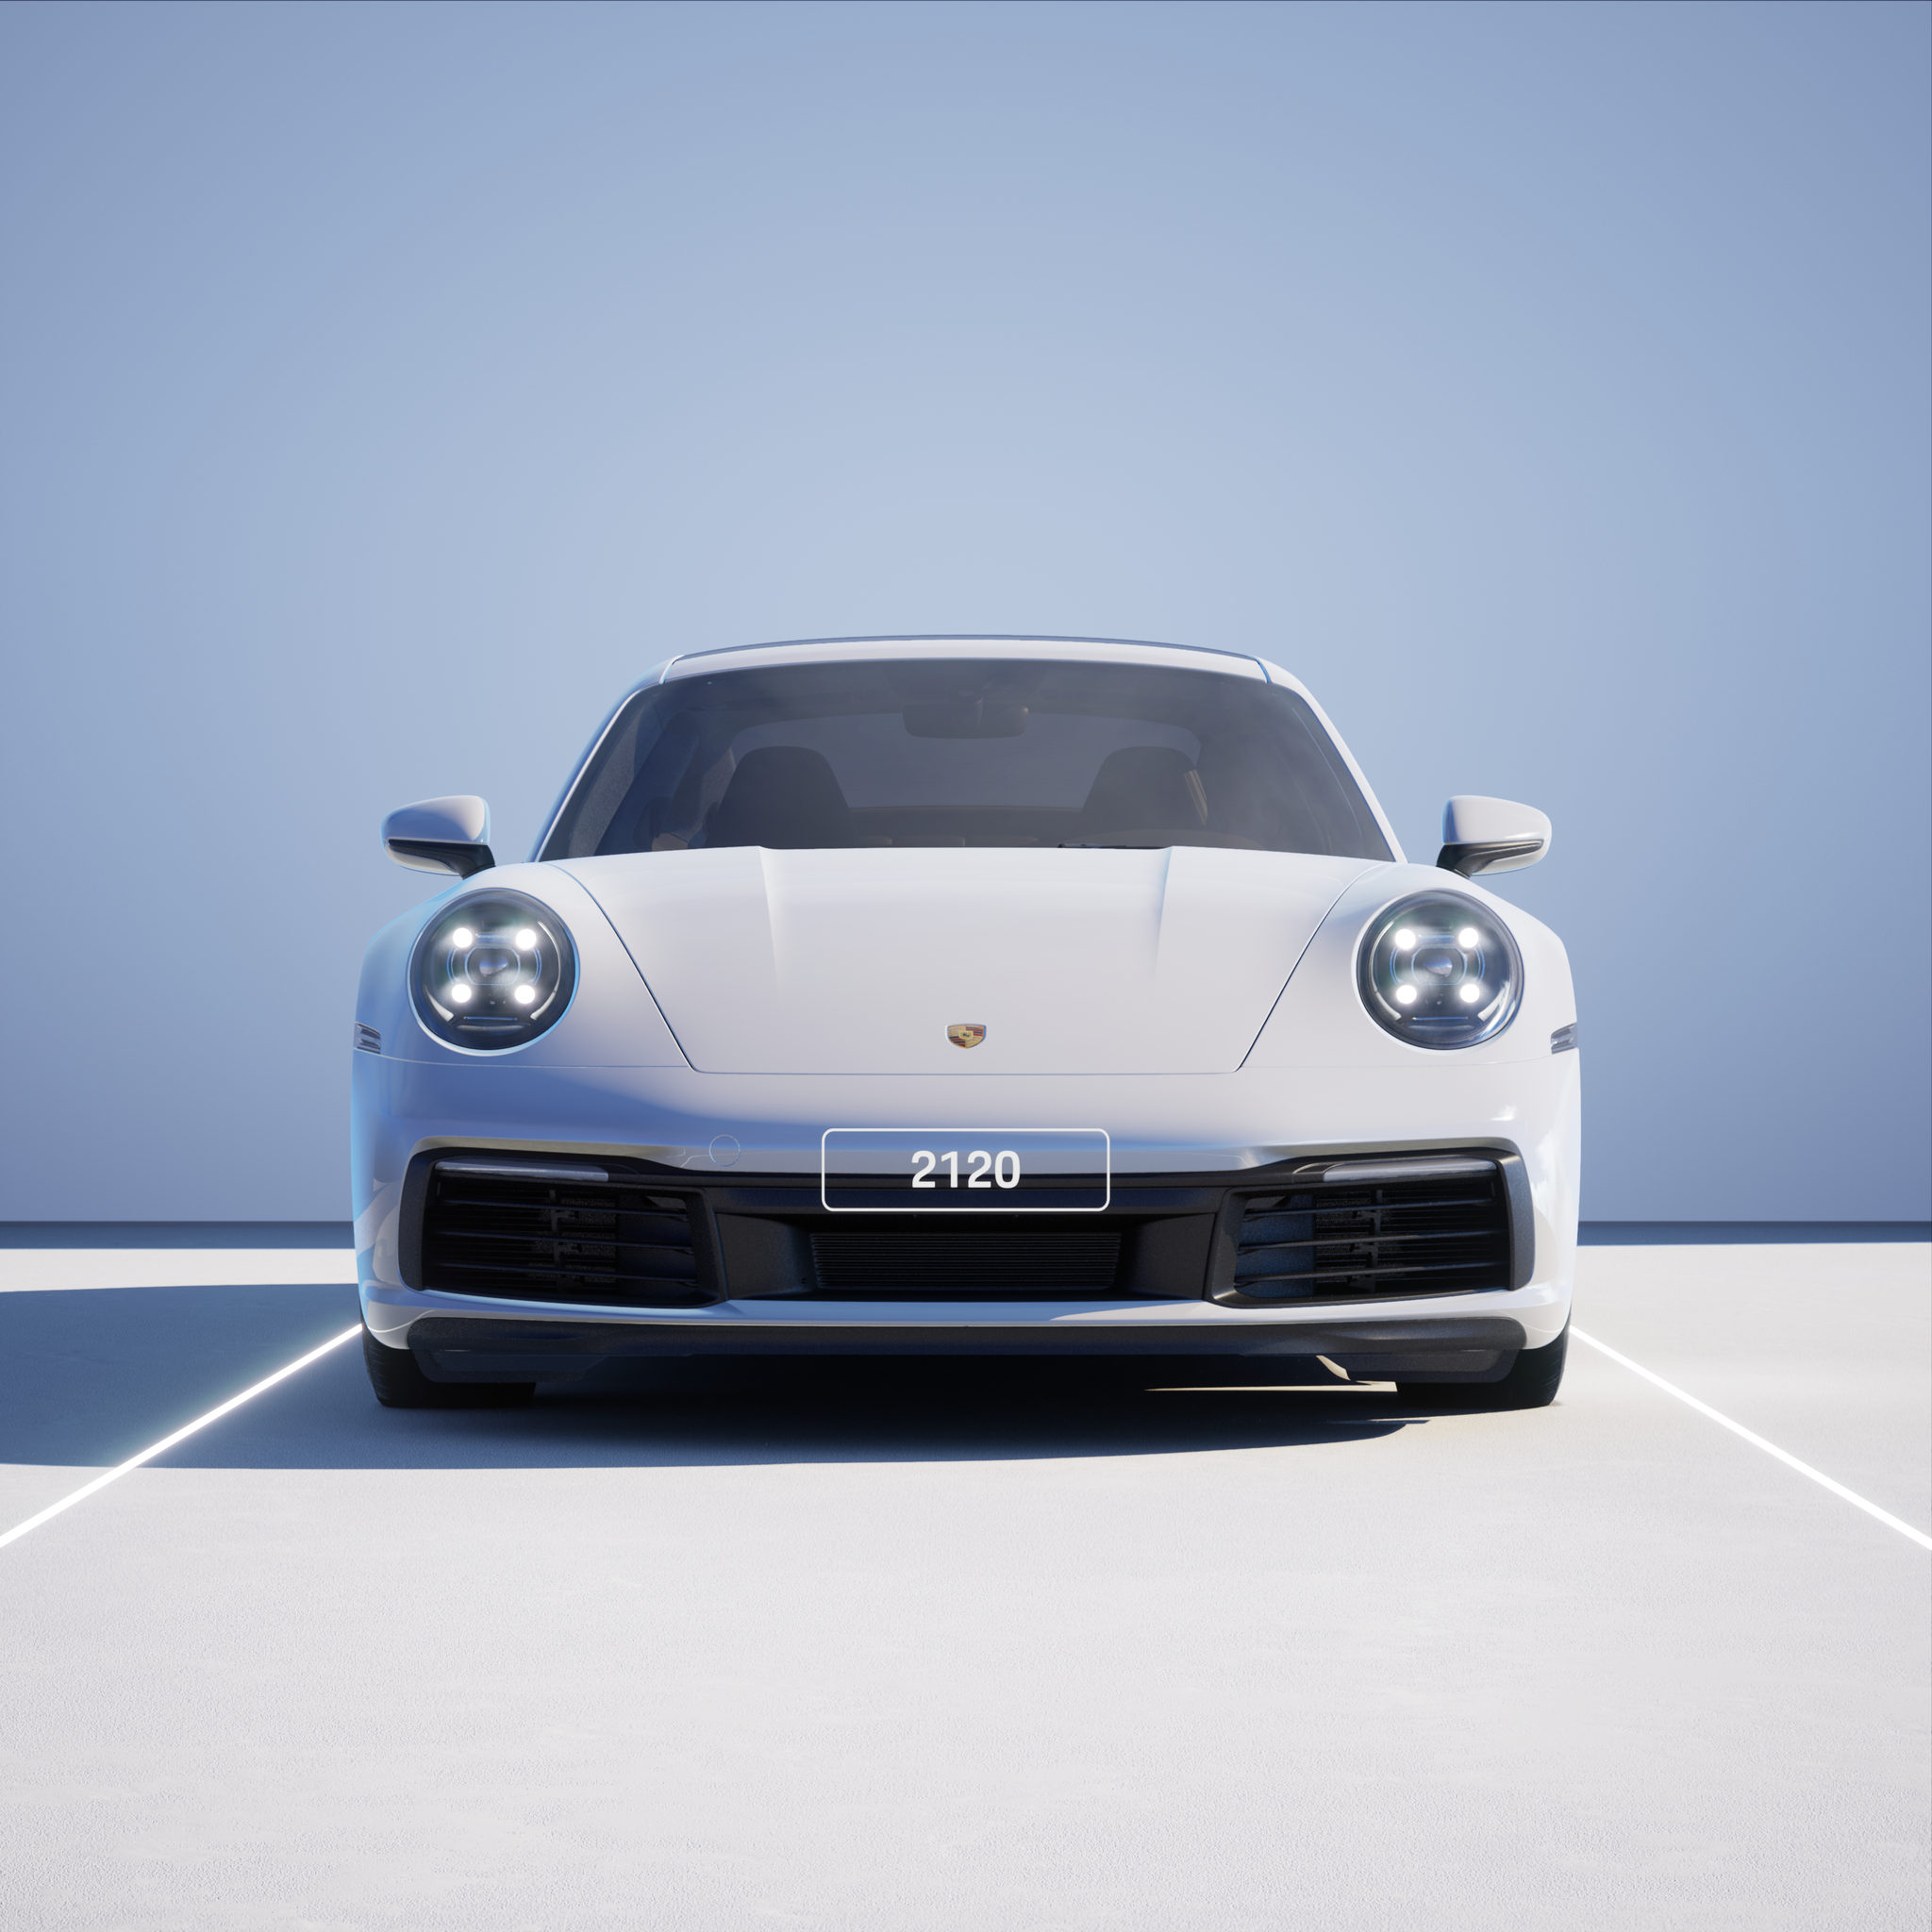 The PORSCHΞ 911 2120 image in phase